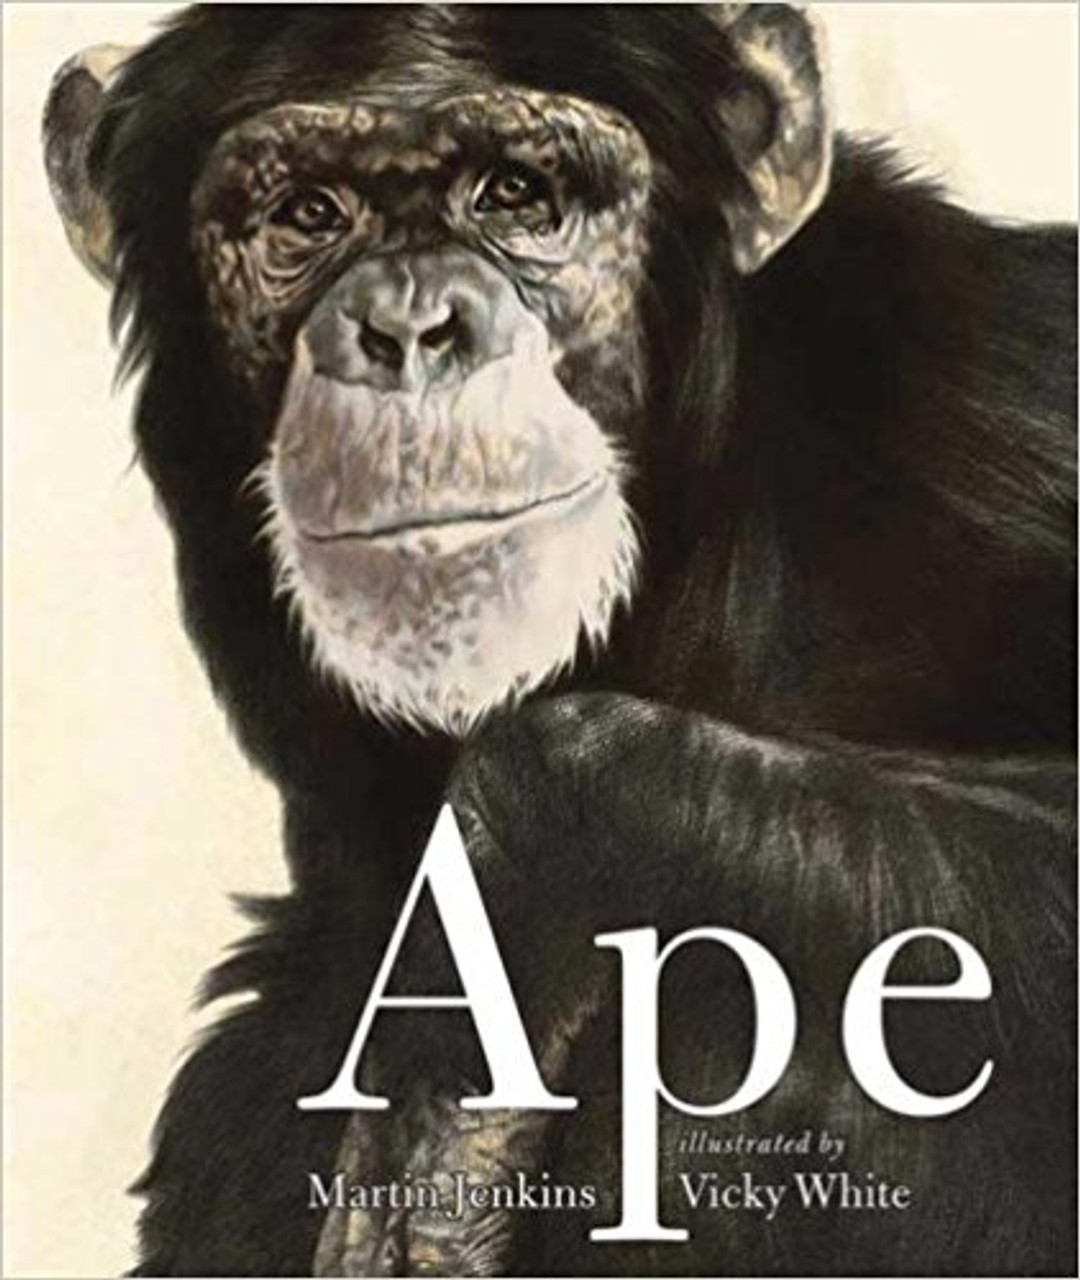 With compelling illustrations and a conservationist slant, this look at four rare great apes--and one very familiar one--is a book that readers are sure to go ape over.